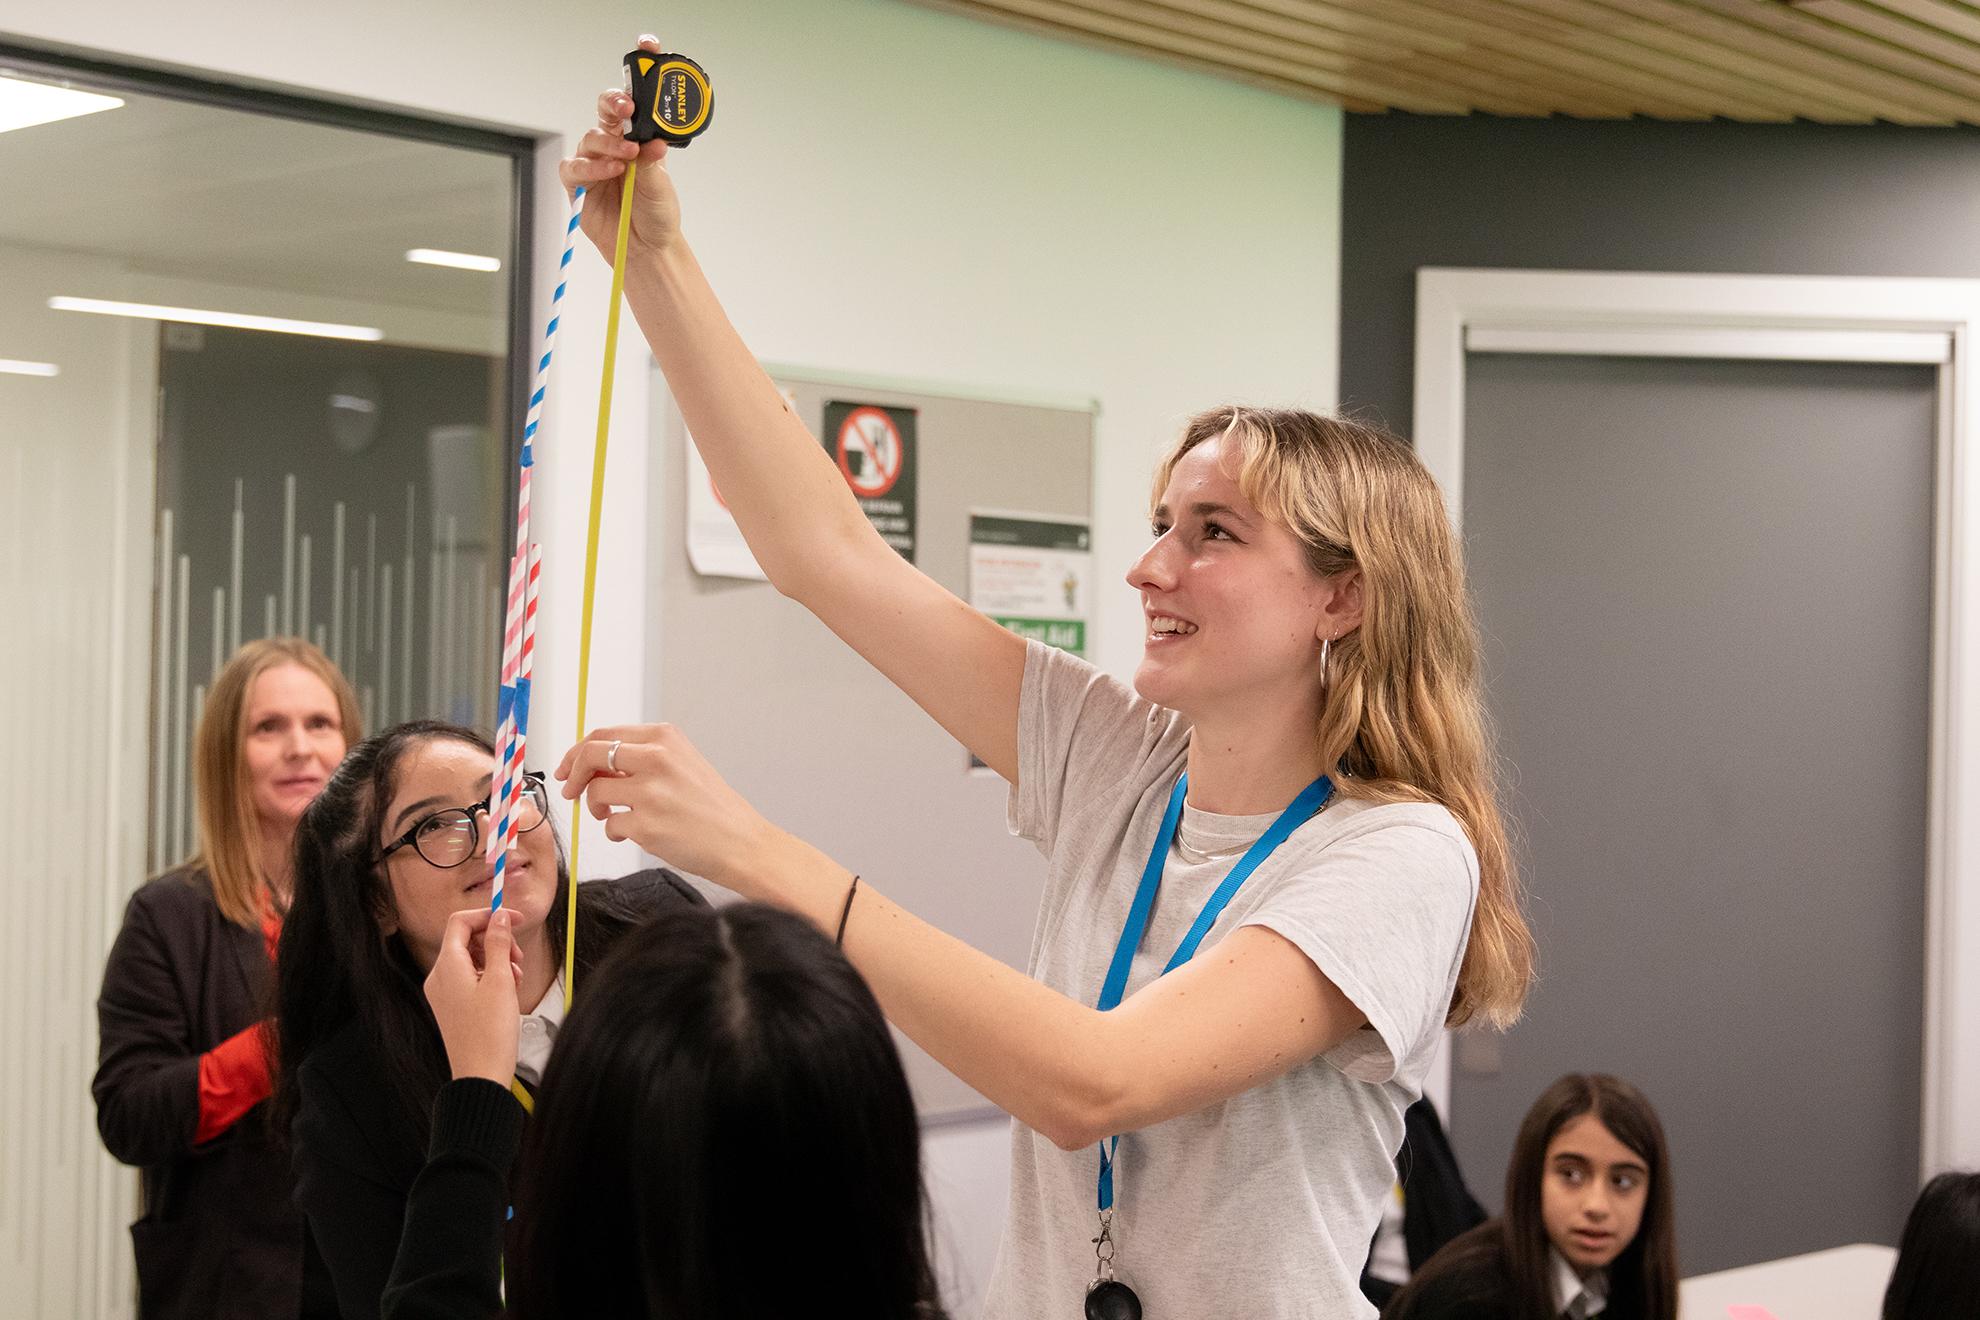 Someone measuring a tower made from straws, using a tape measure, while surrounded by young students.